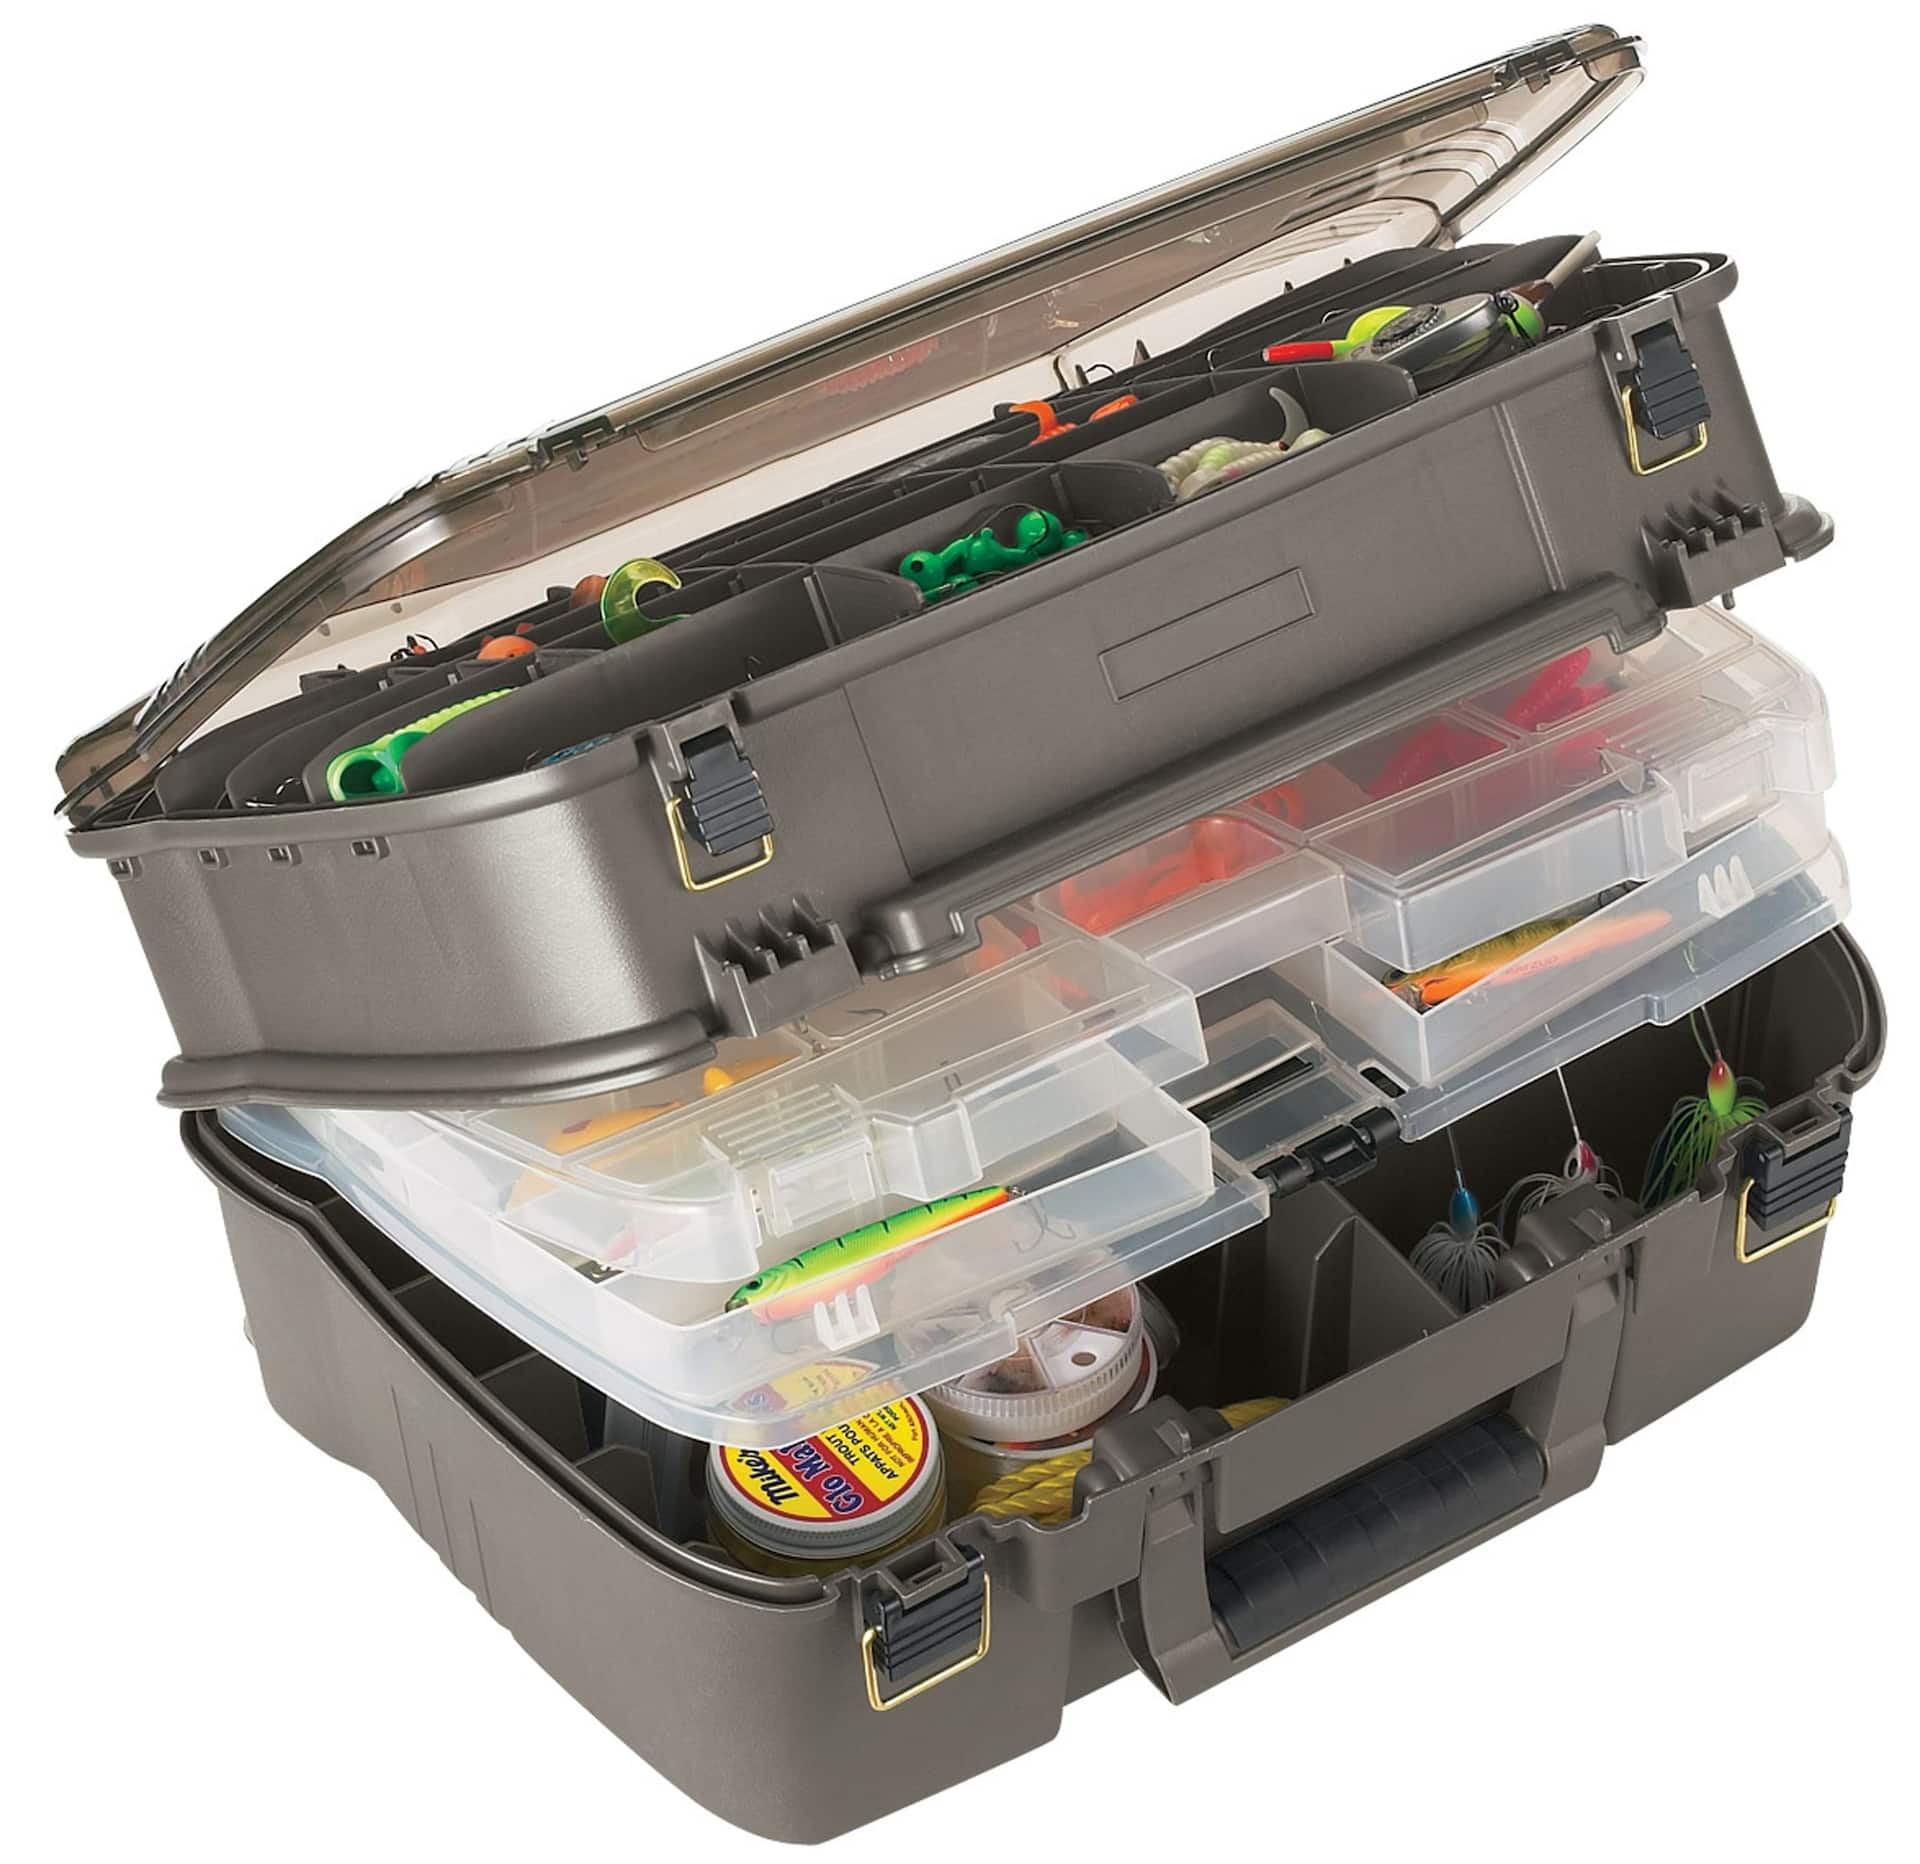 Plano Guide Series Satchel Tackle Box